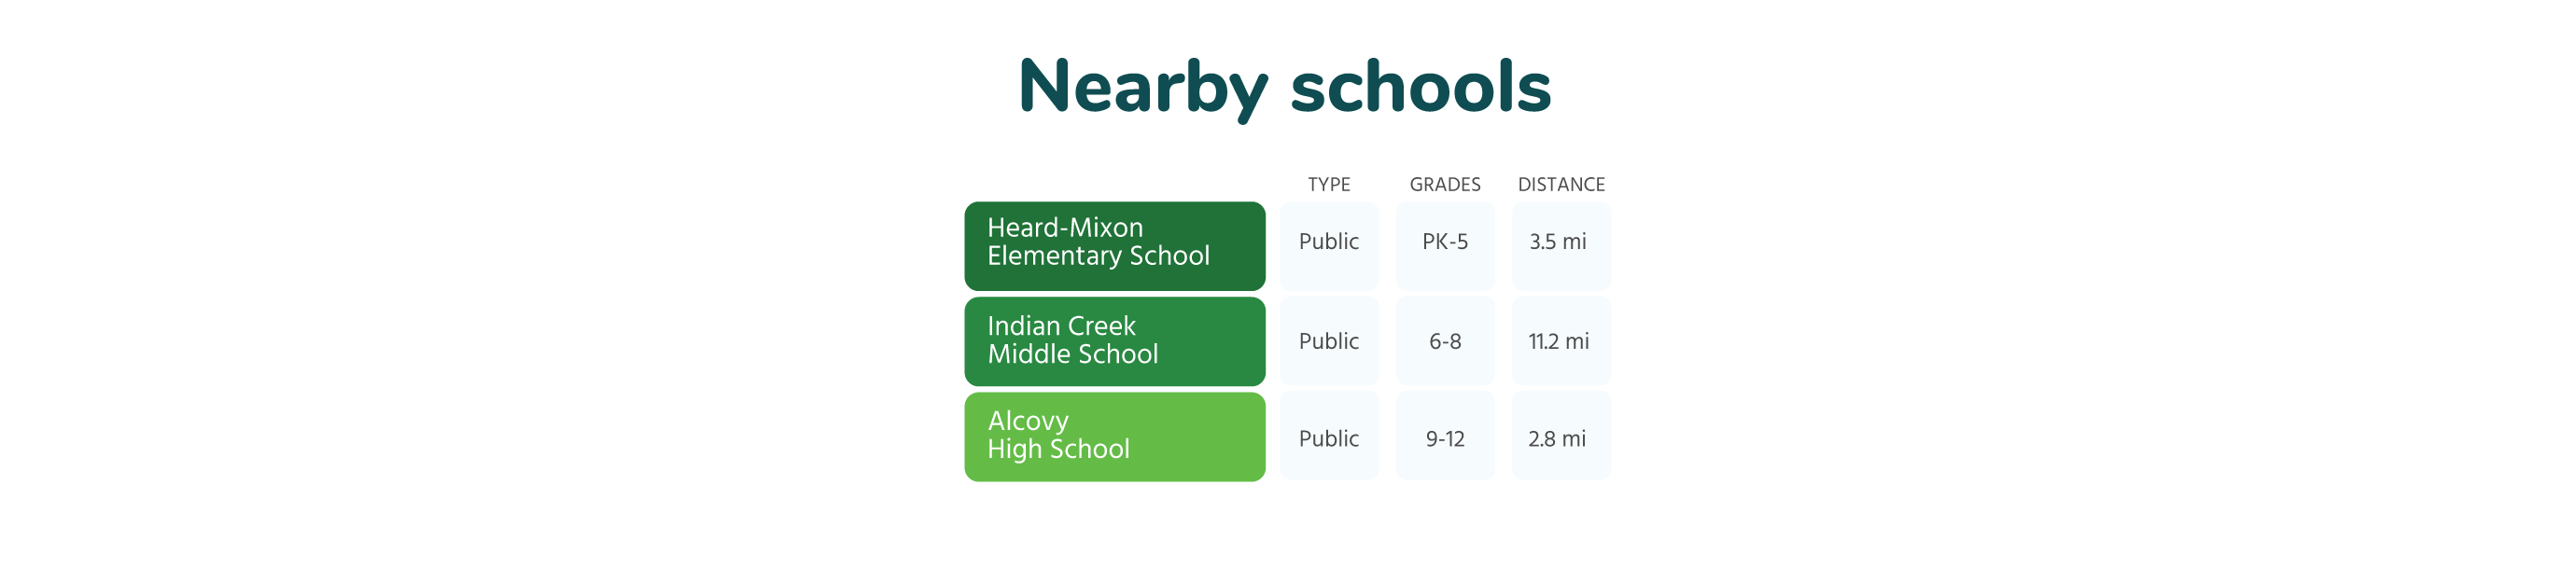 Chart of nearby schools to the Hanley Mill rental community.